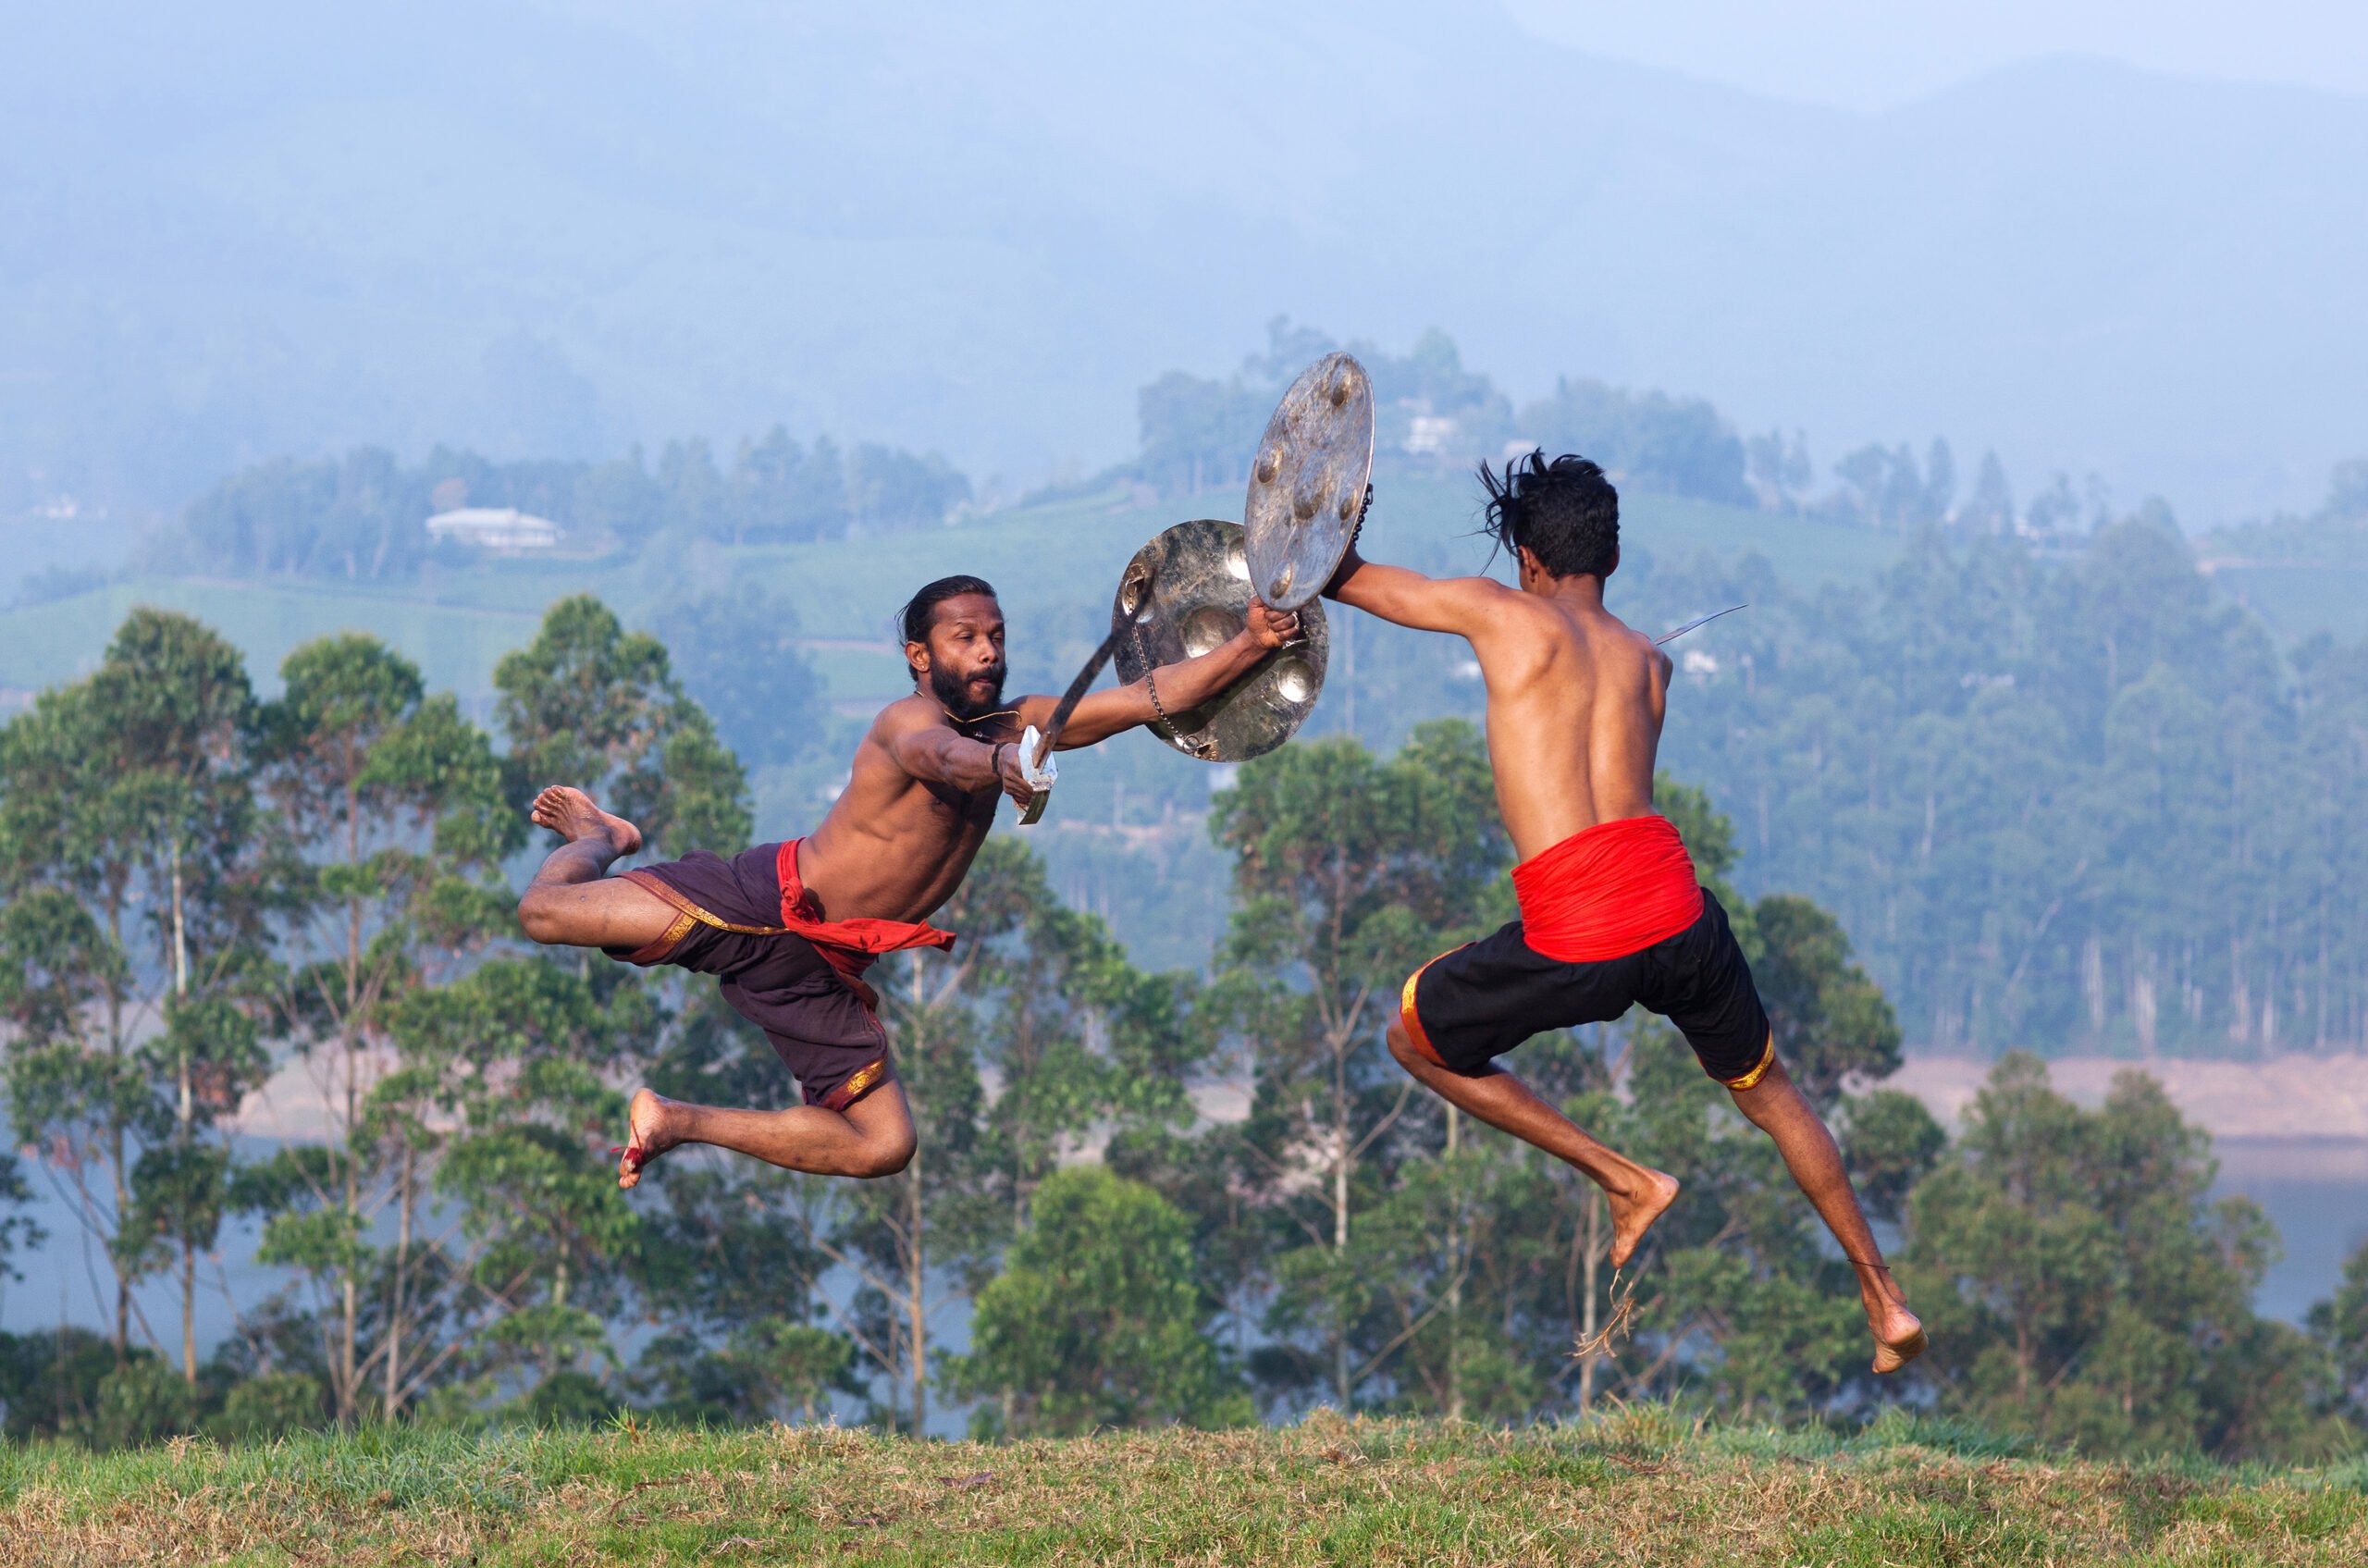 Attend A High Energy Kalaripayattu Performance, The Traditional Martial Arts Of Kerala In Our 3 Day Wildlife And Culture Tour Of Thekkady From Kochi